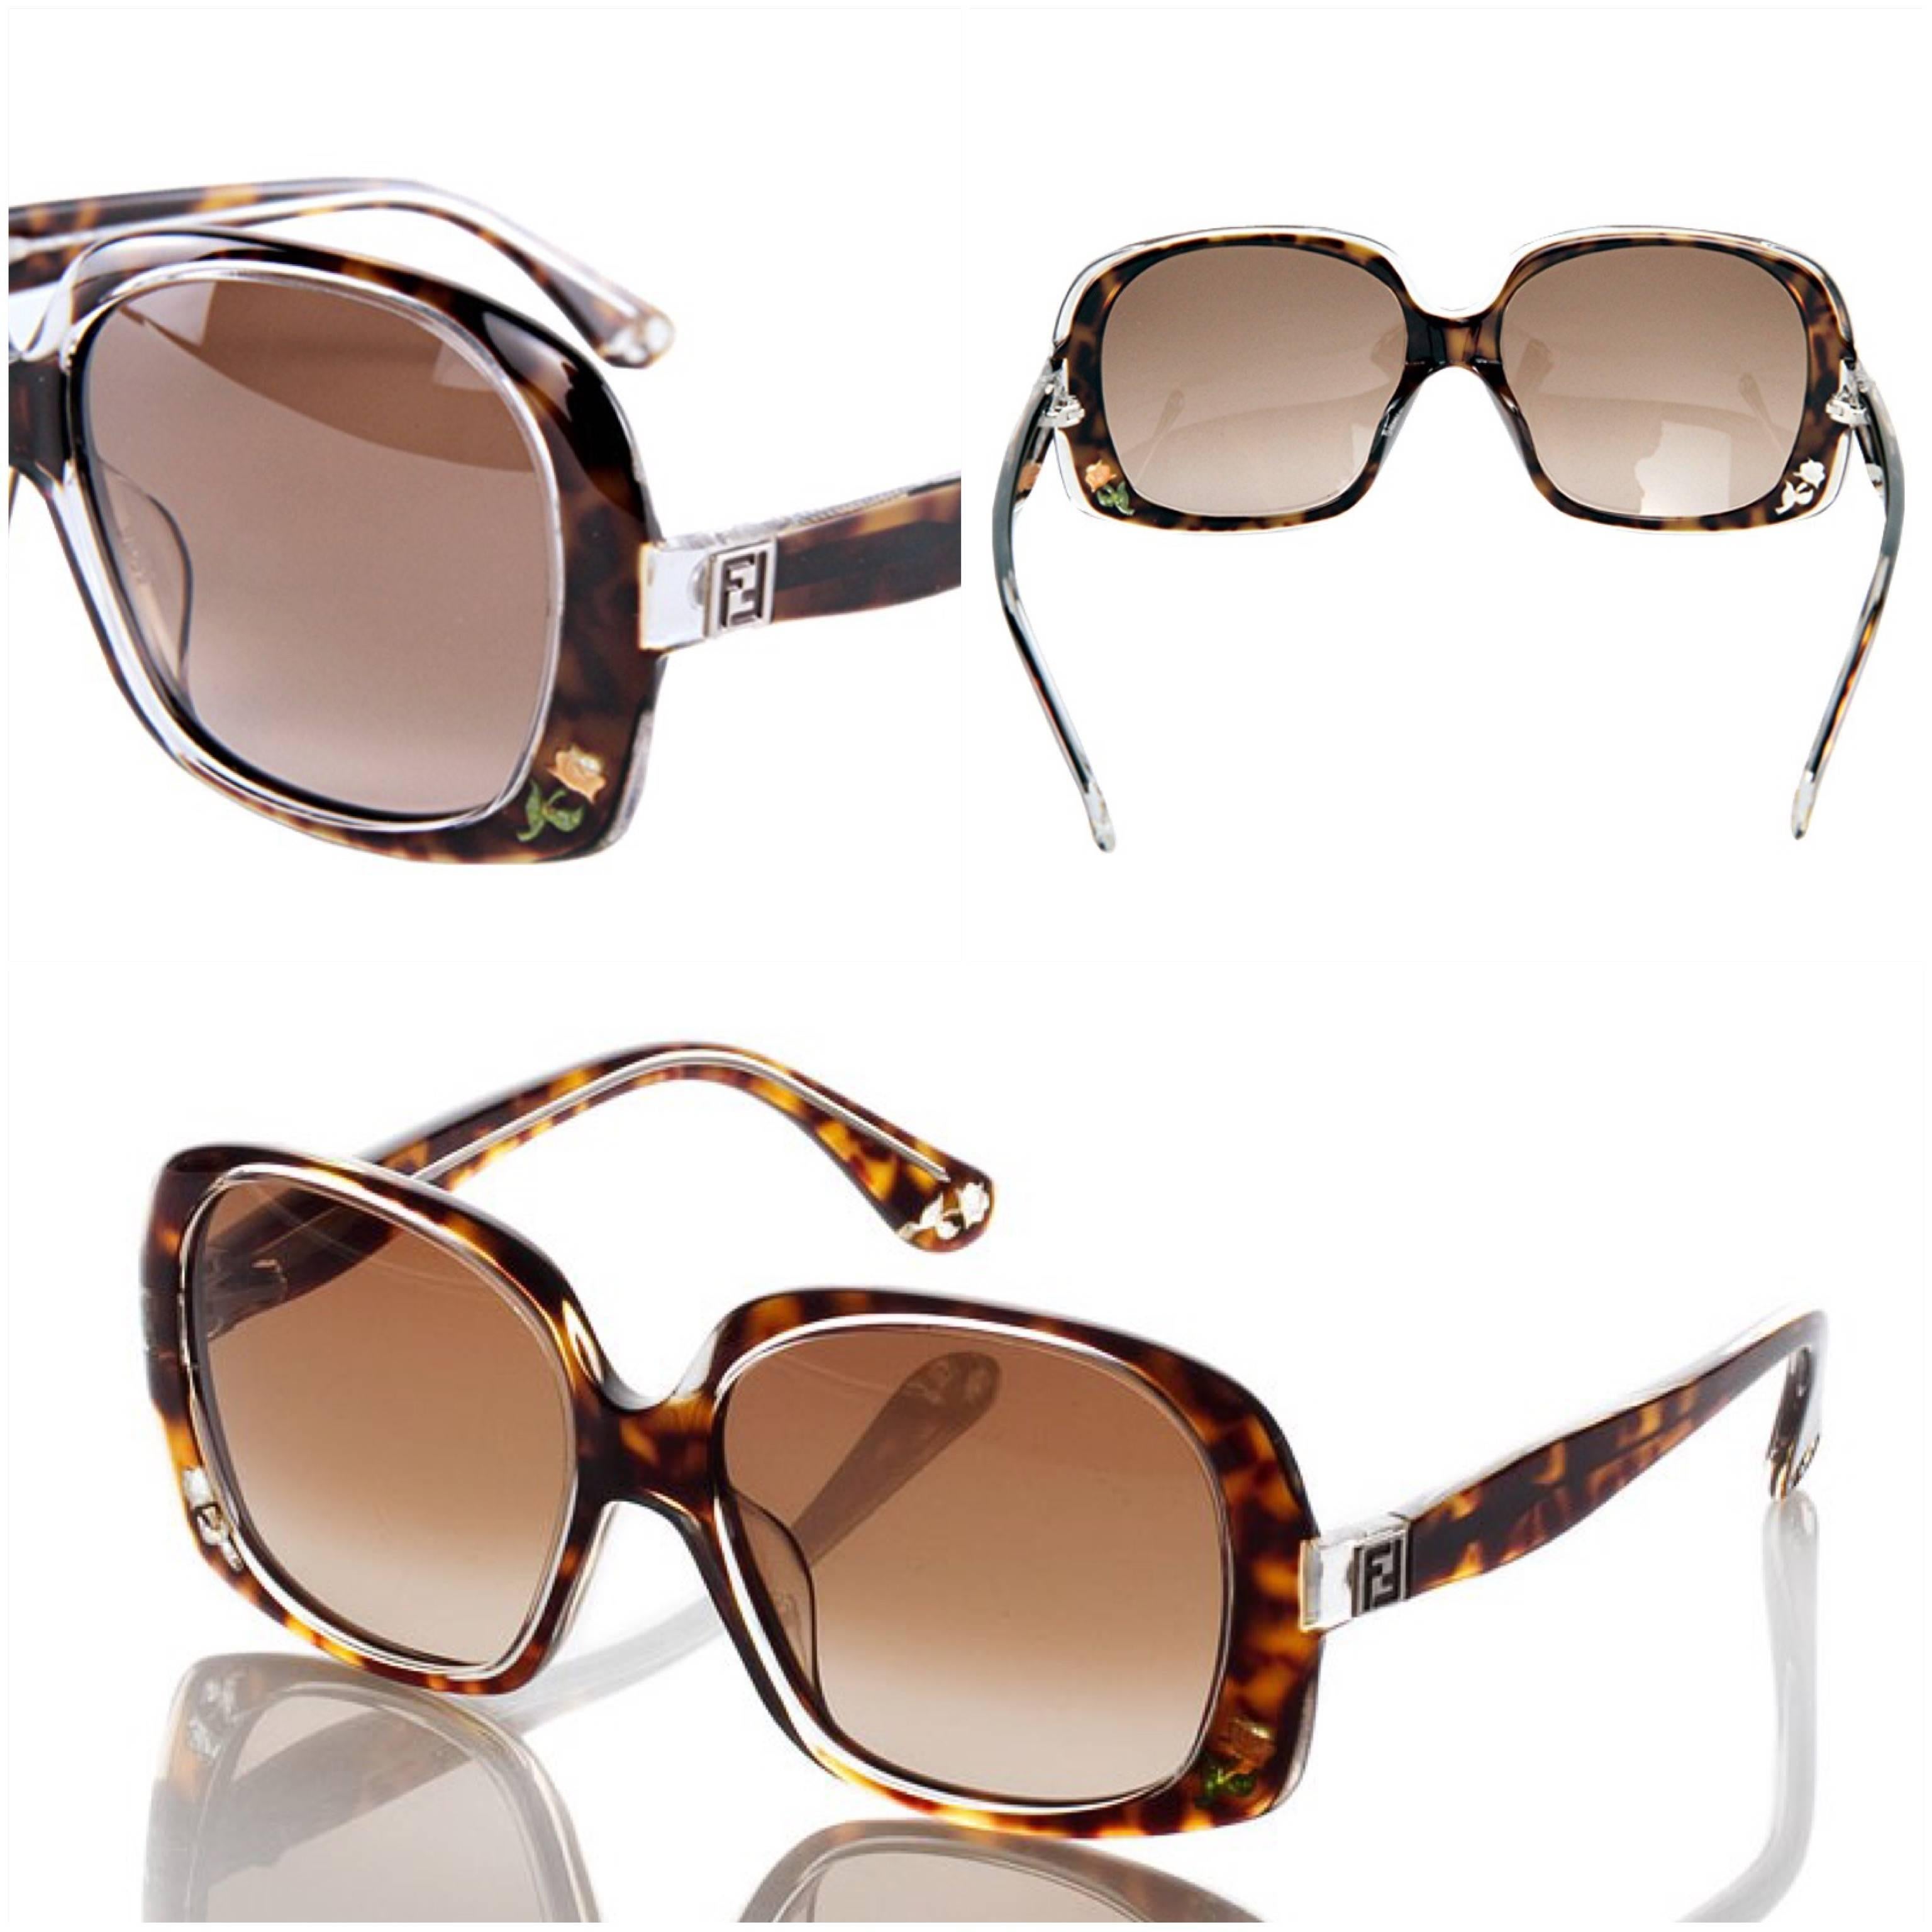  Fendi Rose Sunglasses
Brand New
*Stunning Inlaid Rose Sunglasses
* Tortoise Front & Interior
* Inlaid Rose Detail on the Front & Sides
* FF Details on Temples
* Made in Italy
* 100% UVA/UVB Protection
* Comes with Case & Cleaning Clothing 